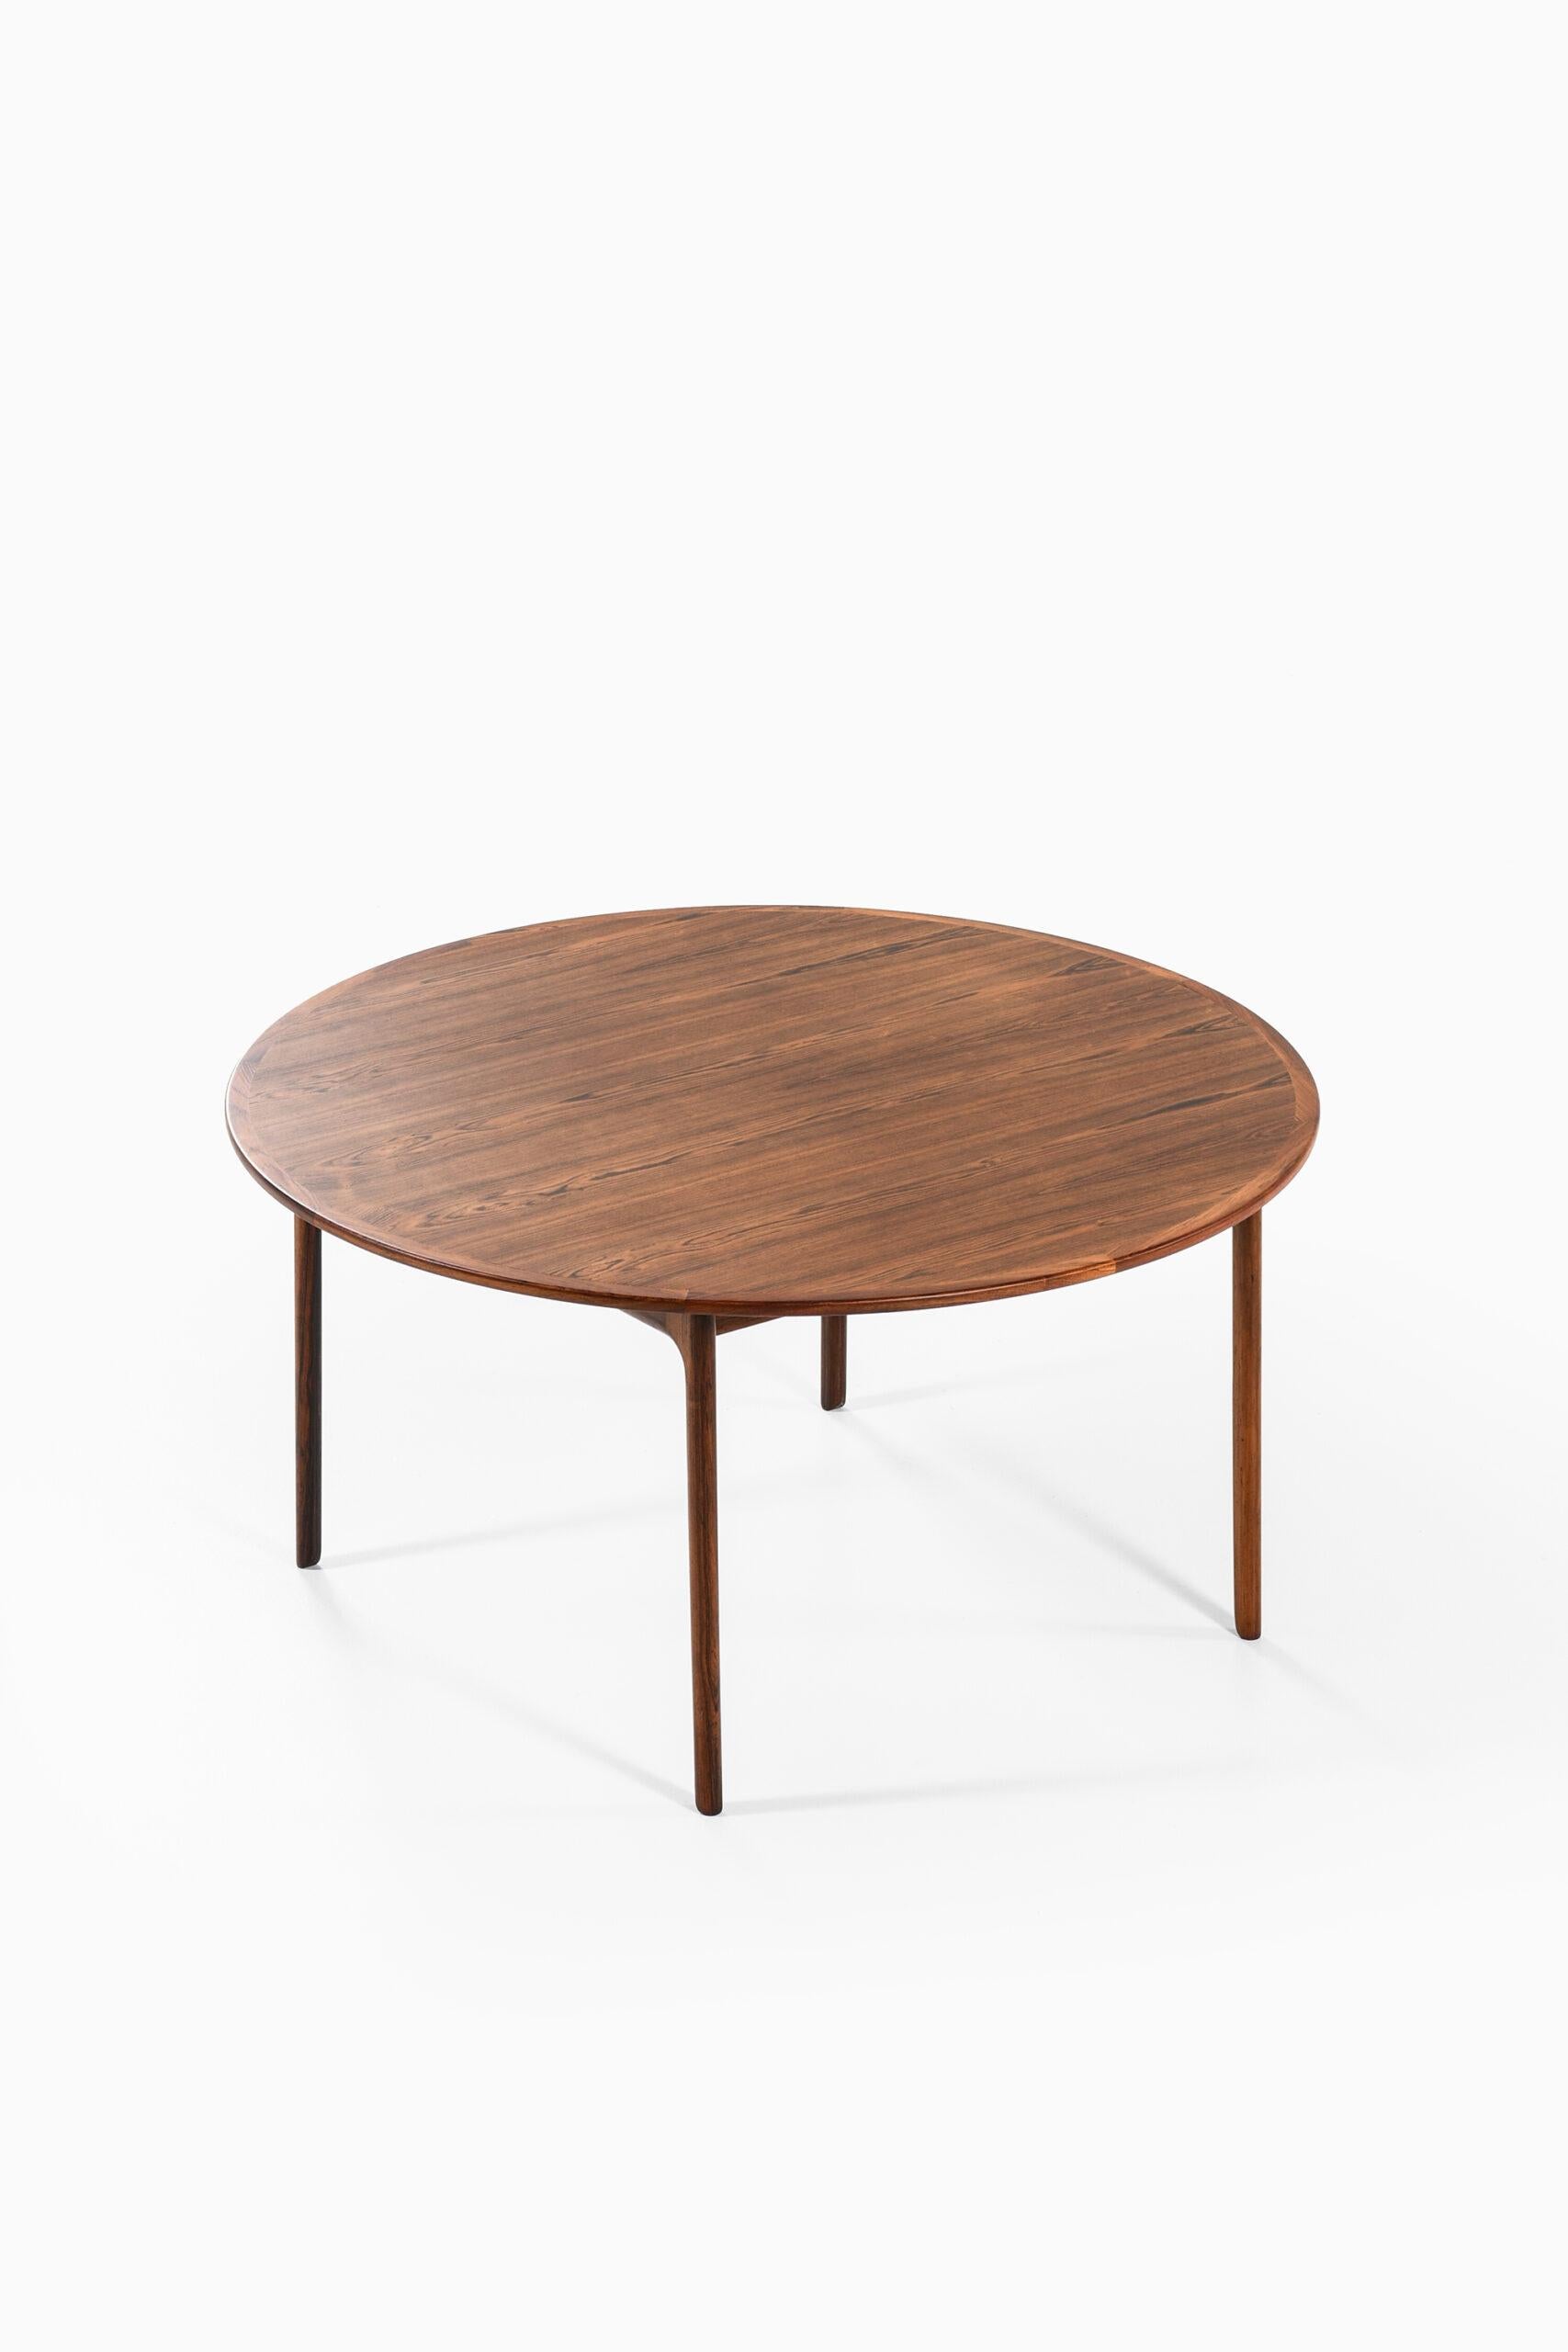 Ole Wanscher Coffee Table Produced by P. Jeppesens Møbelfabrik in Denmark For Sale 1